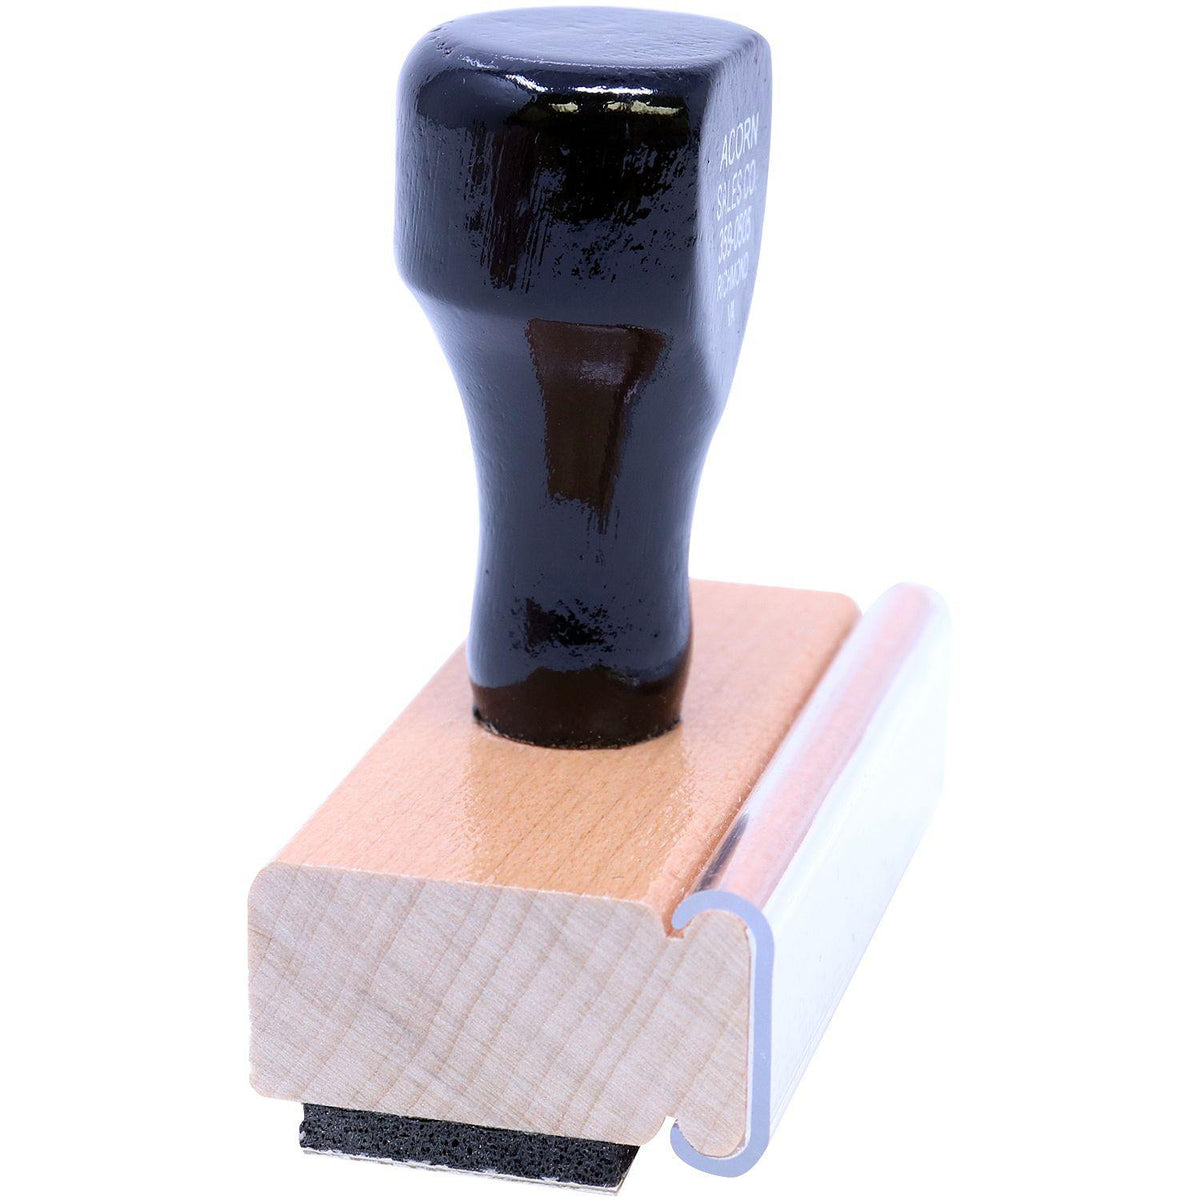 Side View of Large Printed Matter Rubber Stamp at an Angle